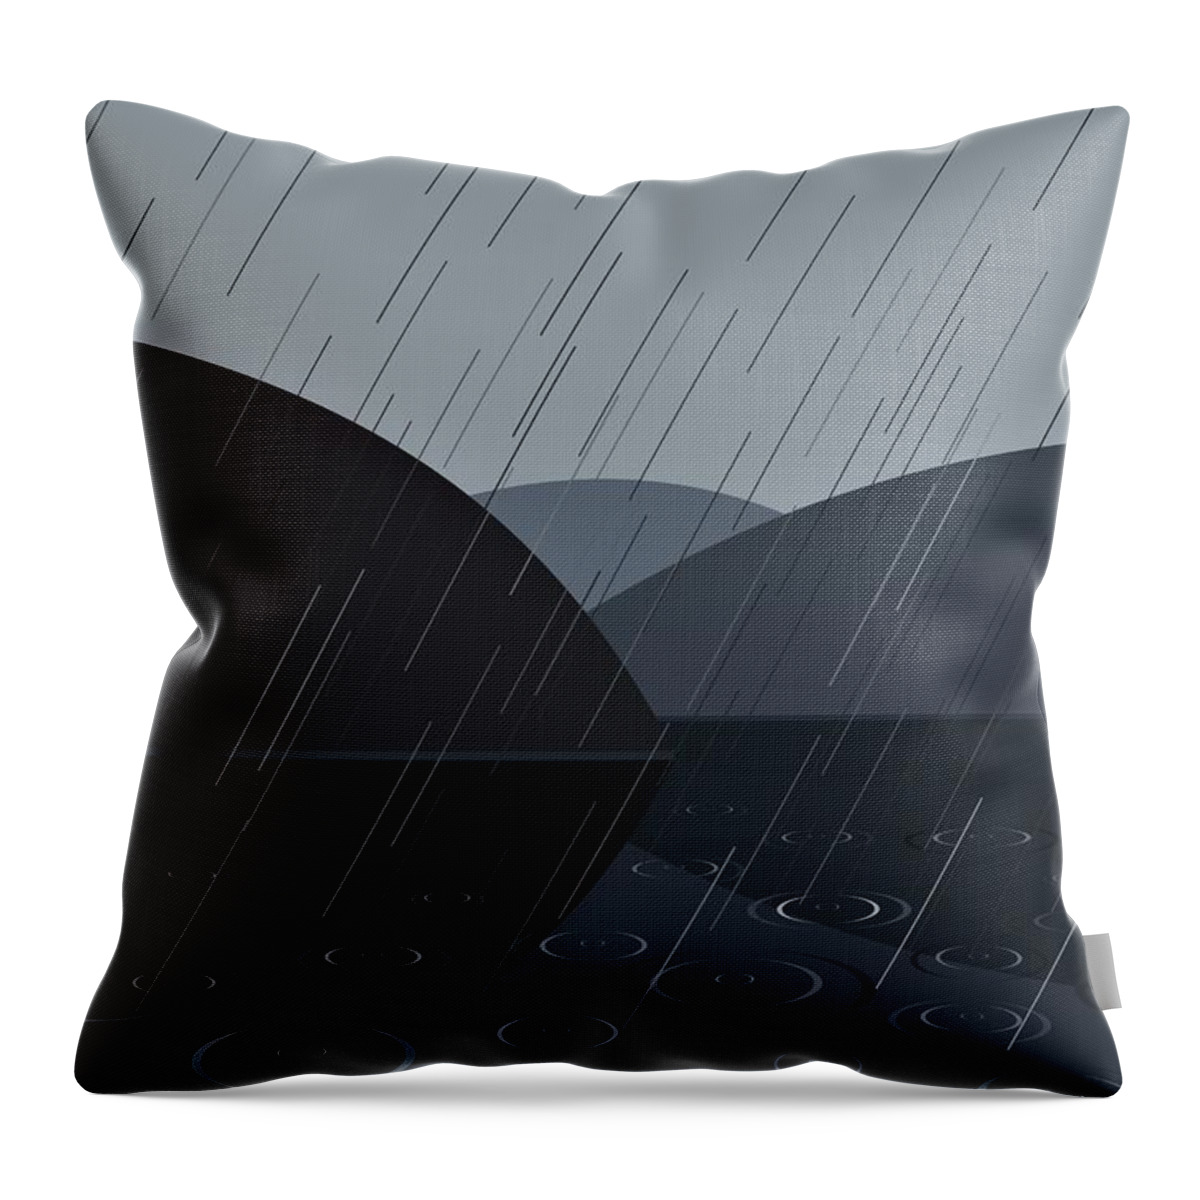 Raining Throw Pillow featuring the digital art Pouring Down by Fatline Graphic Art